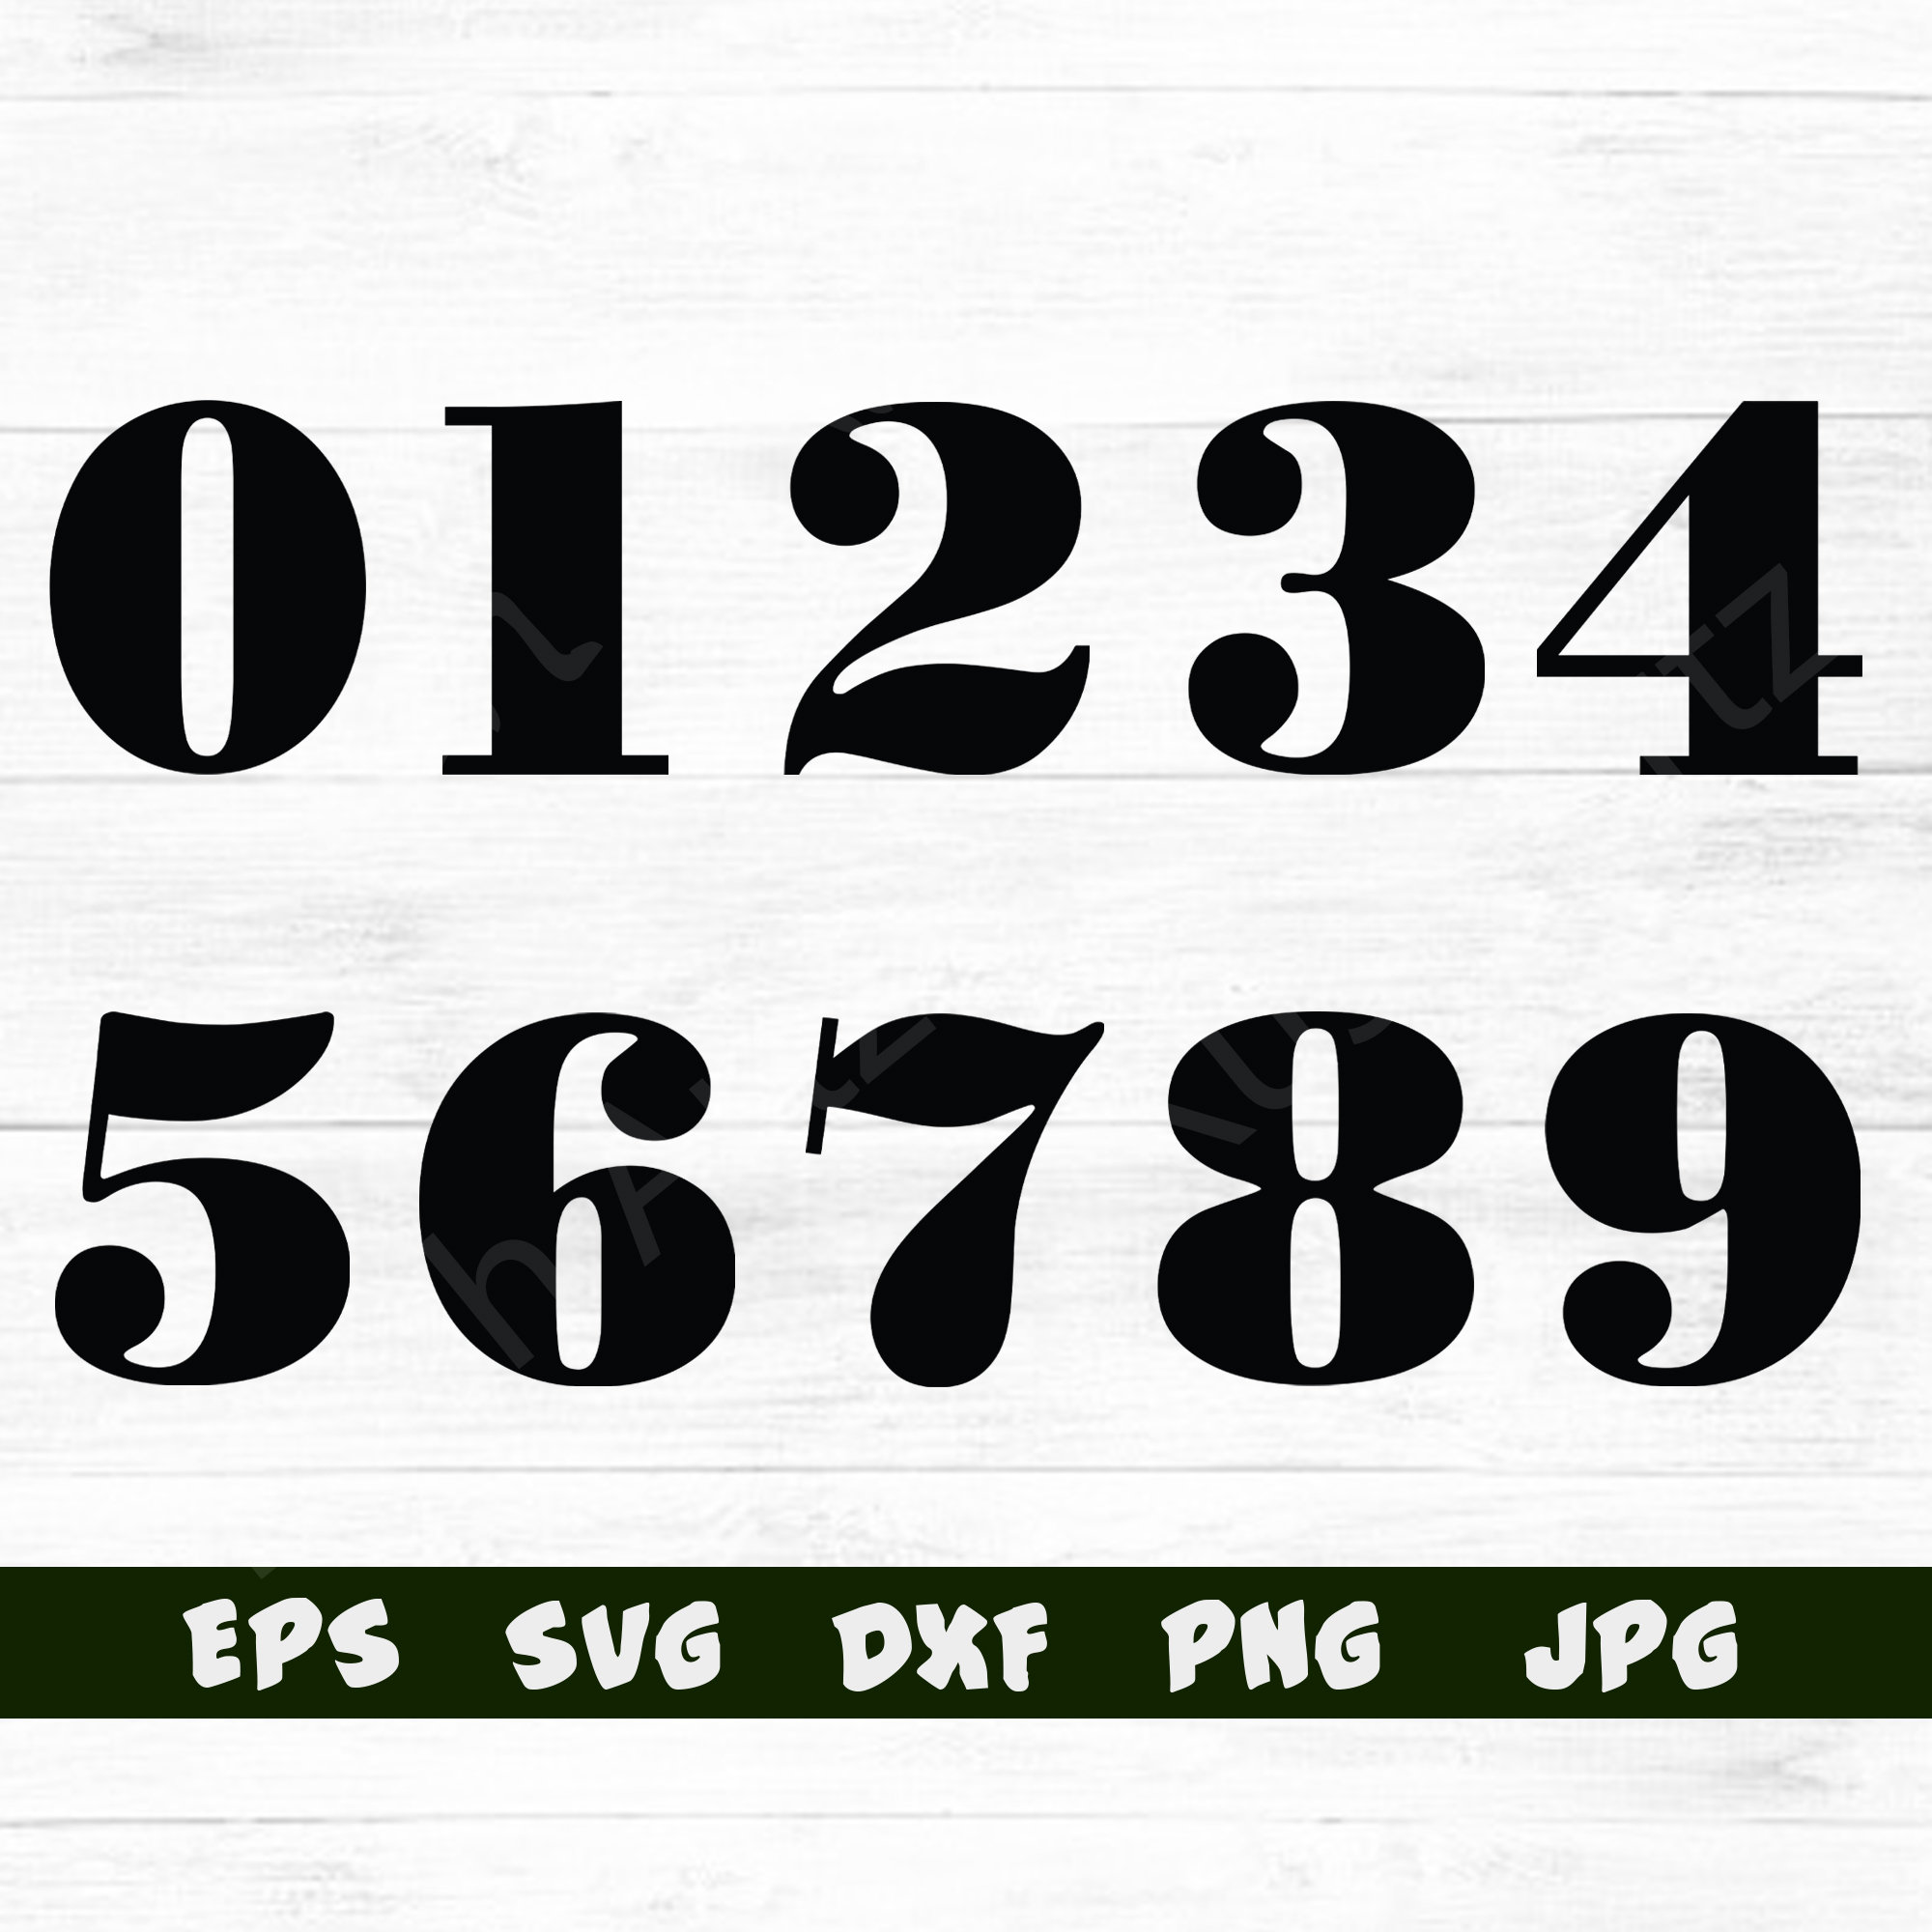 Numbers Printable Clipart Vector, Printable Cute Number Sticker Ser, Number,  Sticker, Number Sticker PNG Image For Free Download